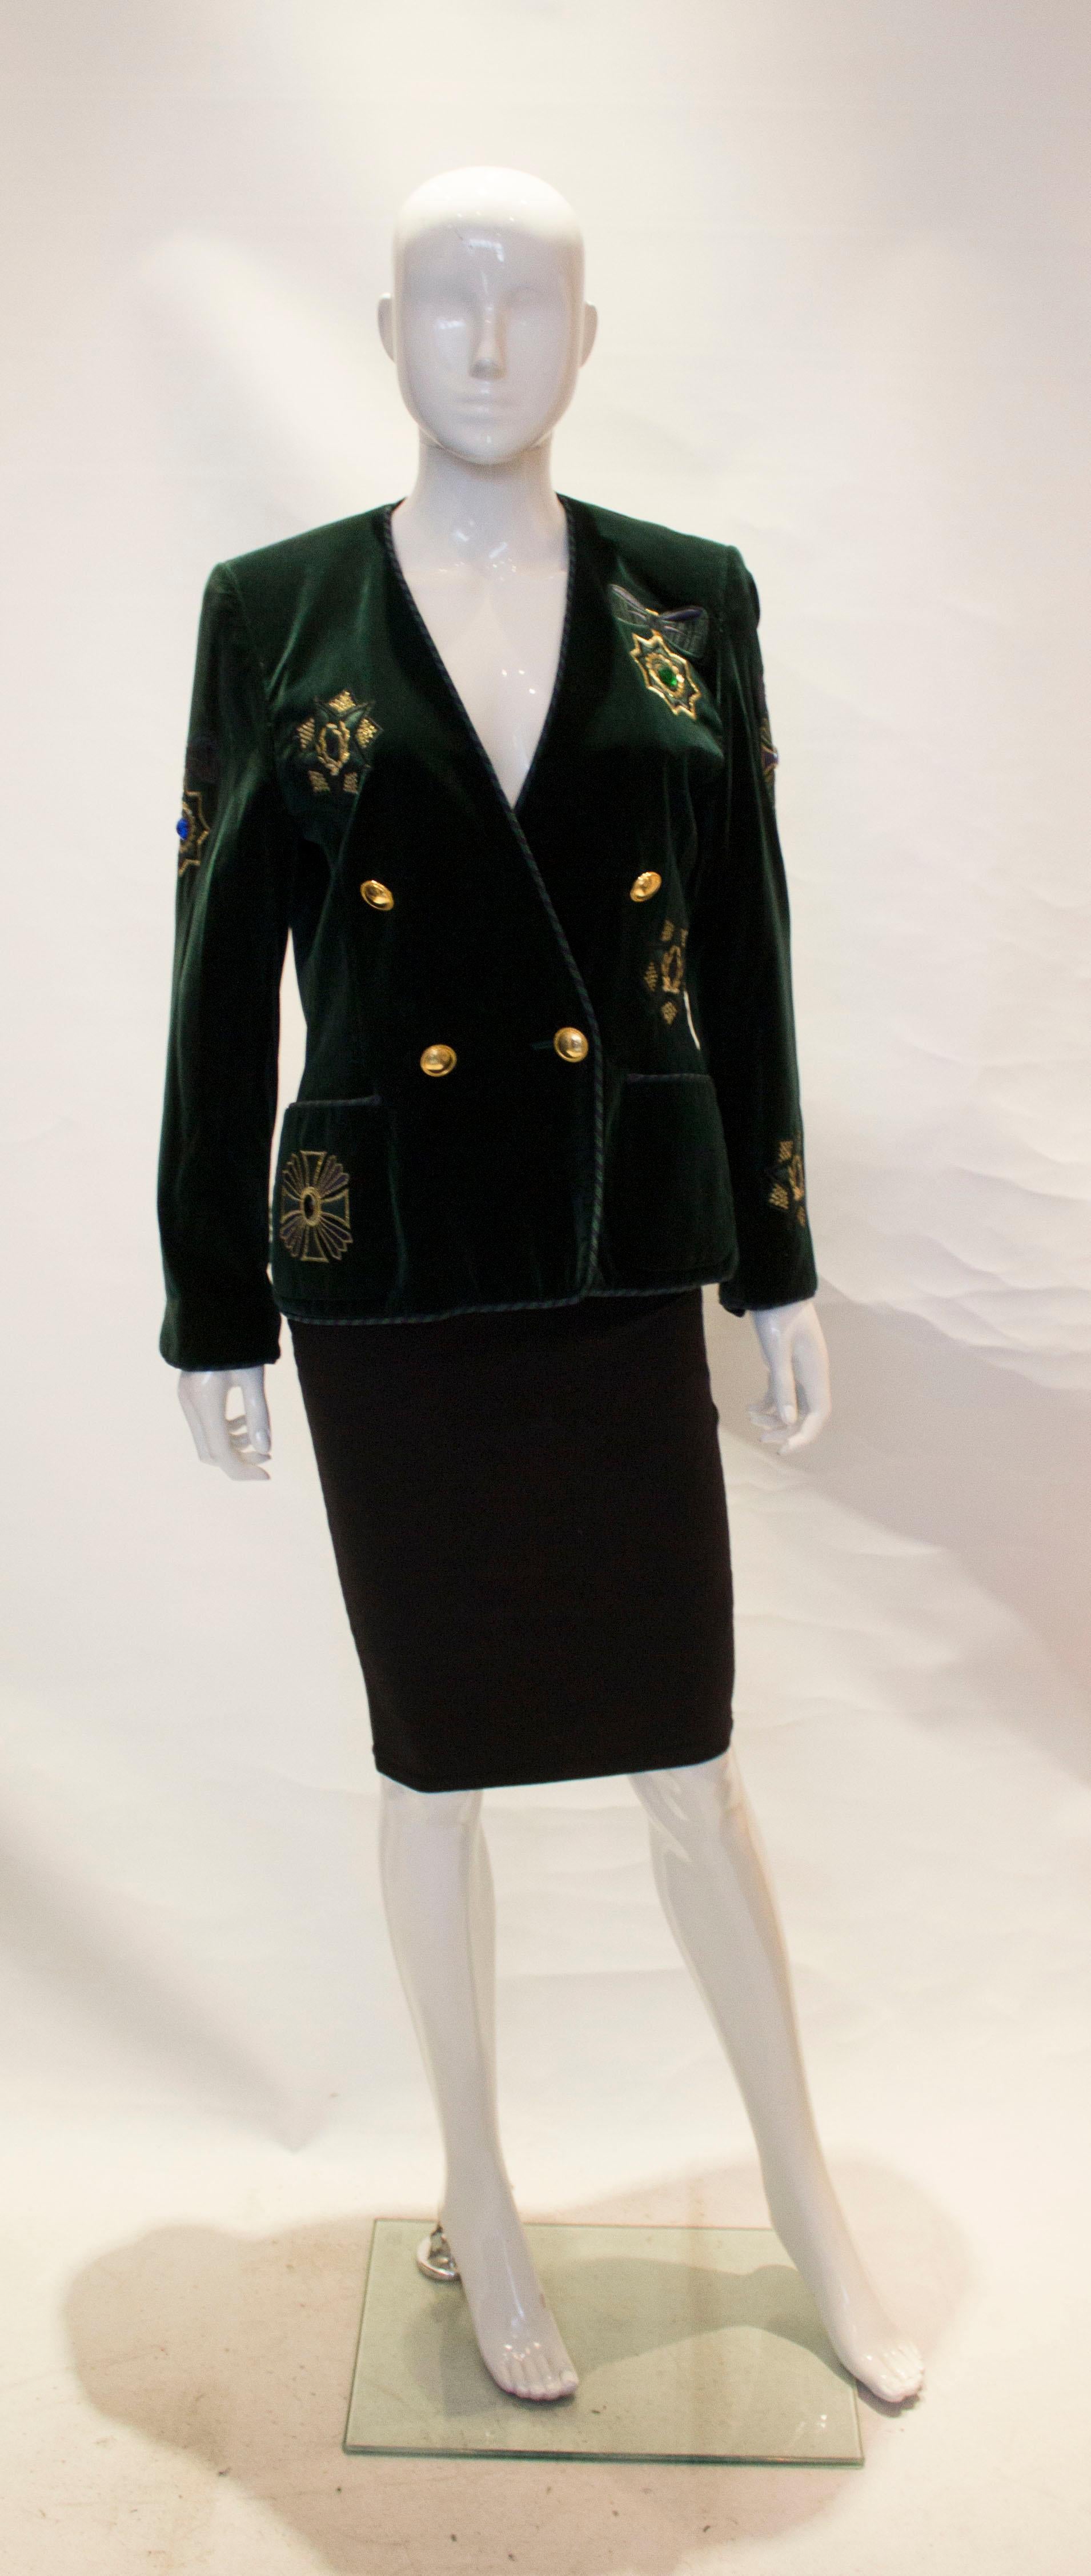 A stunning vintage green velvet jacket by  Escada. The jacket is in a wonderful green with embellishment, and stripe braid detail. It is double breasted, with two front pockets and three button cuffs.